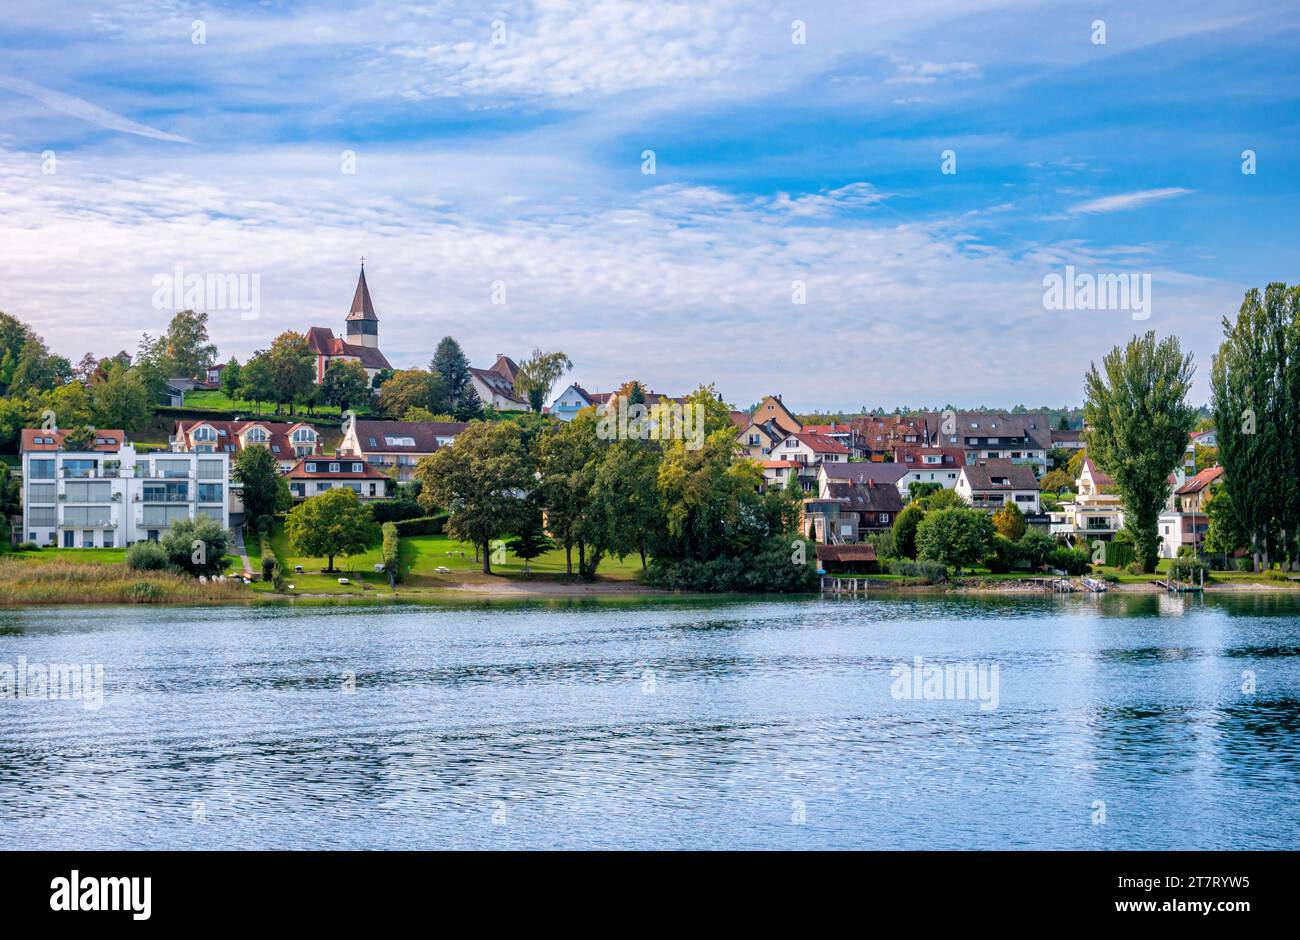 View of Dingelsdorf on Lake Constance, Baden-Württemberg, Germany, Europe Stock Photo